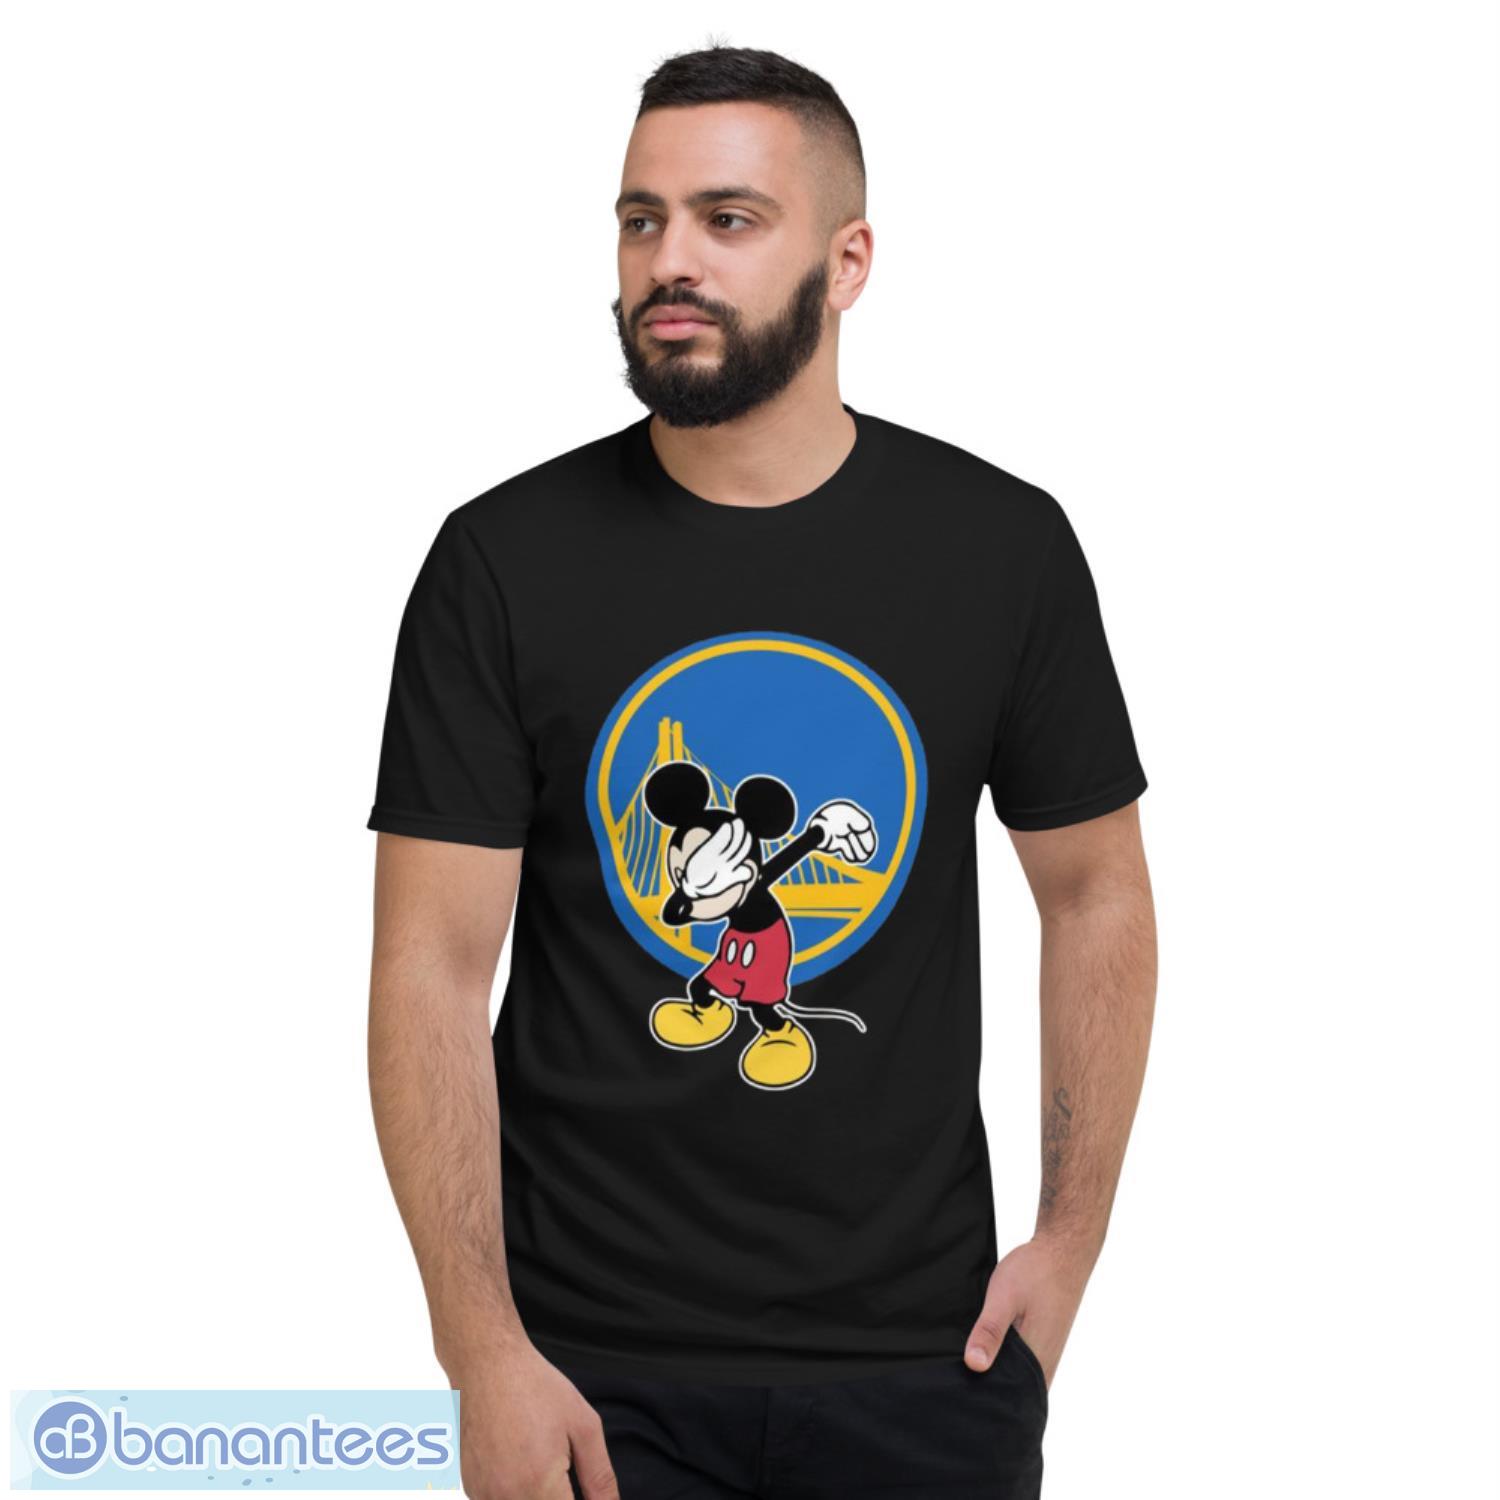 Golden State Warriors Basketball & Mickey Mouse Purple Next